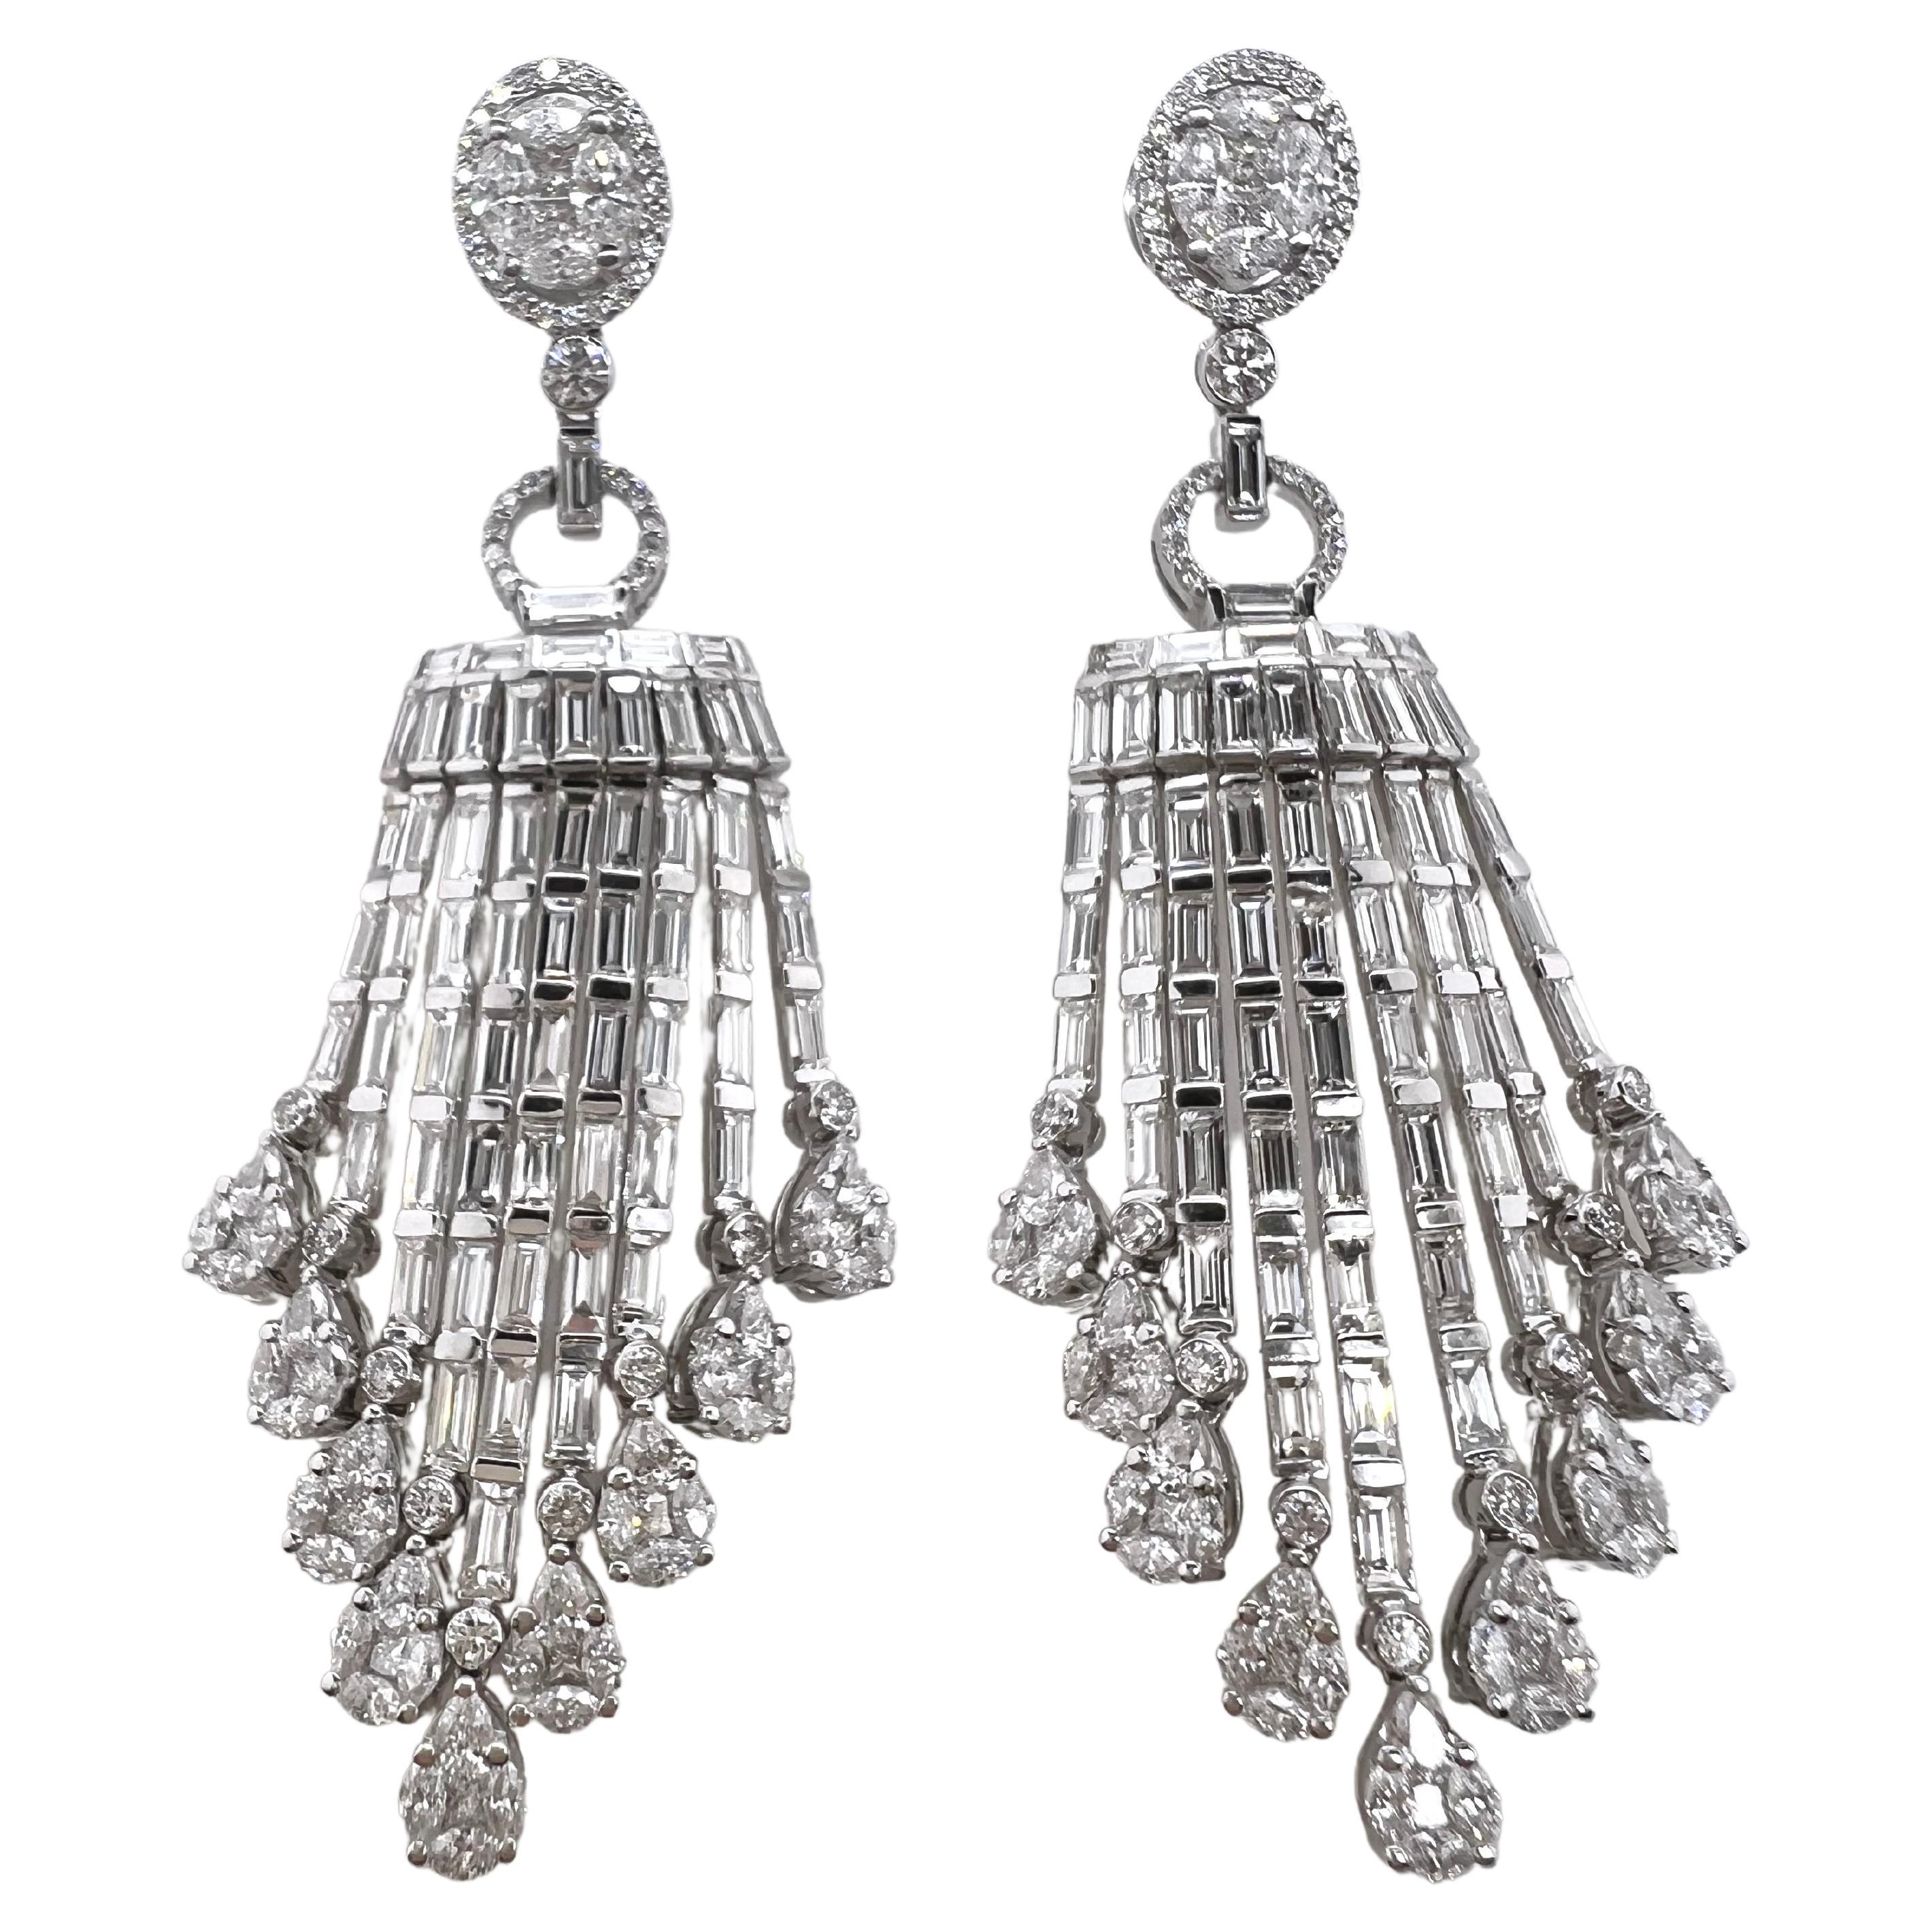 18k White Gold Chandelier Diamond Earrings with Baguettes and Round Diamonds